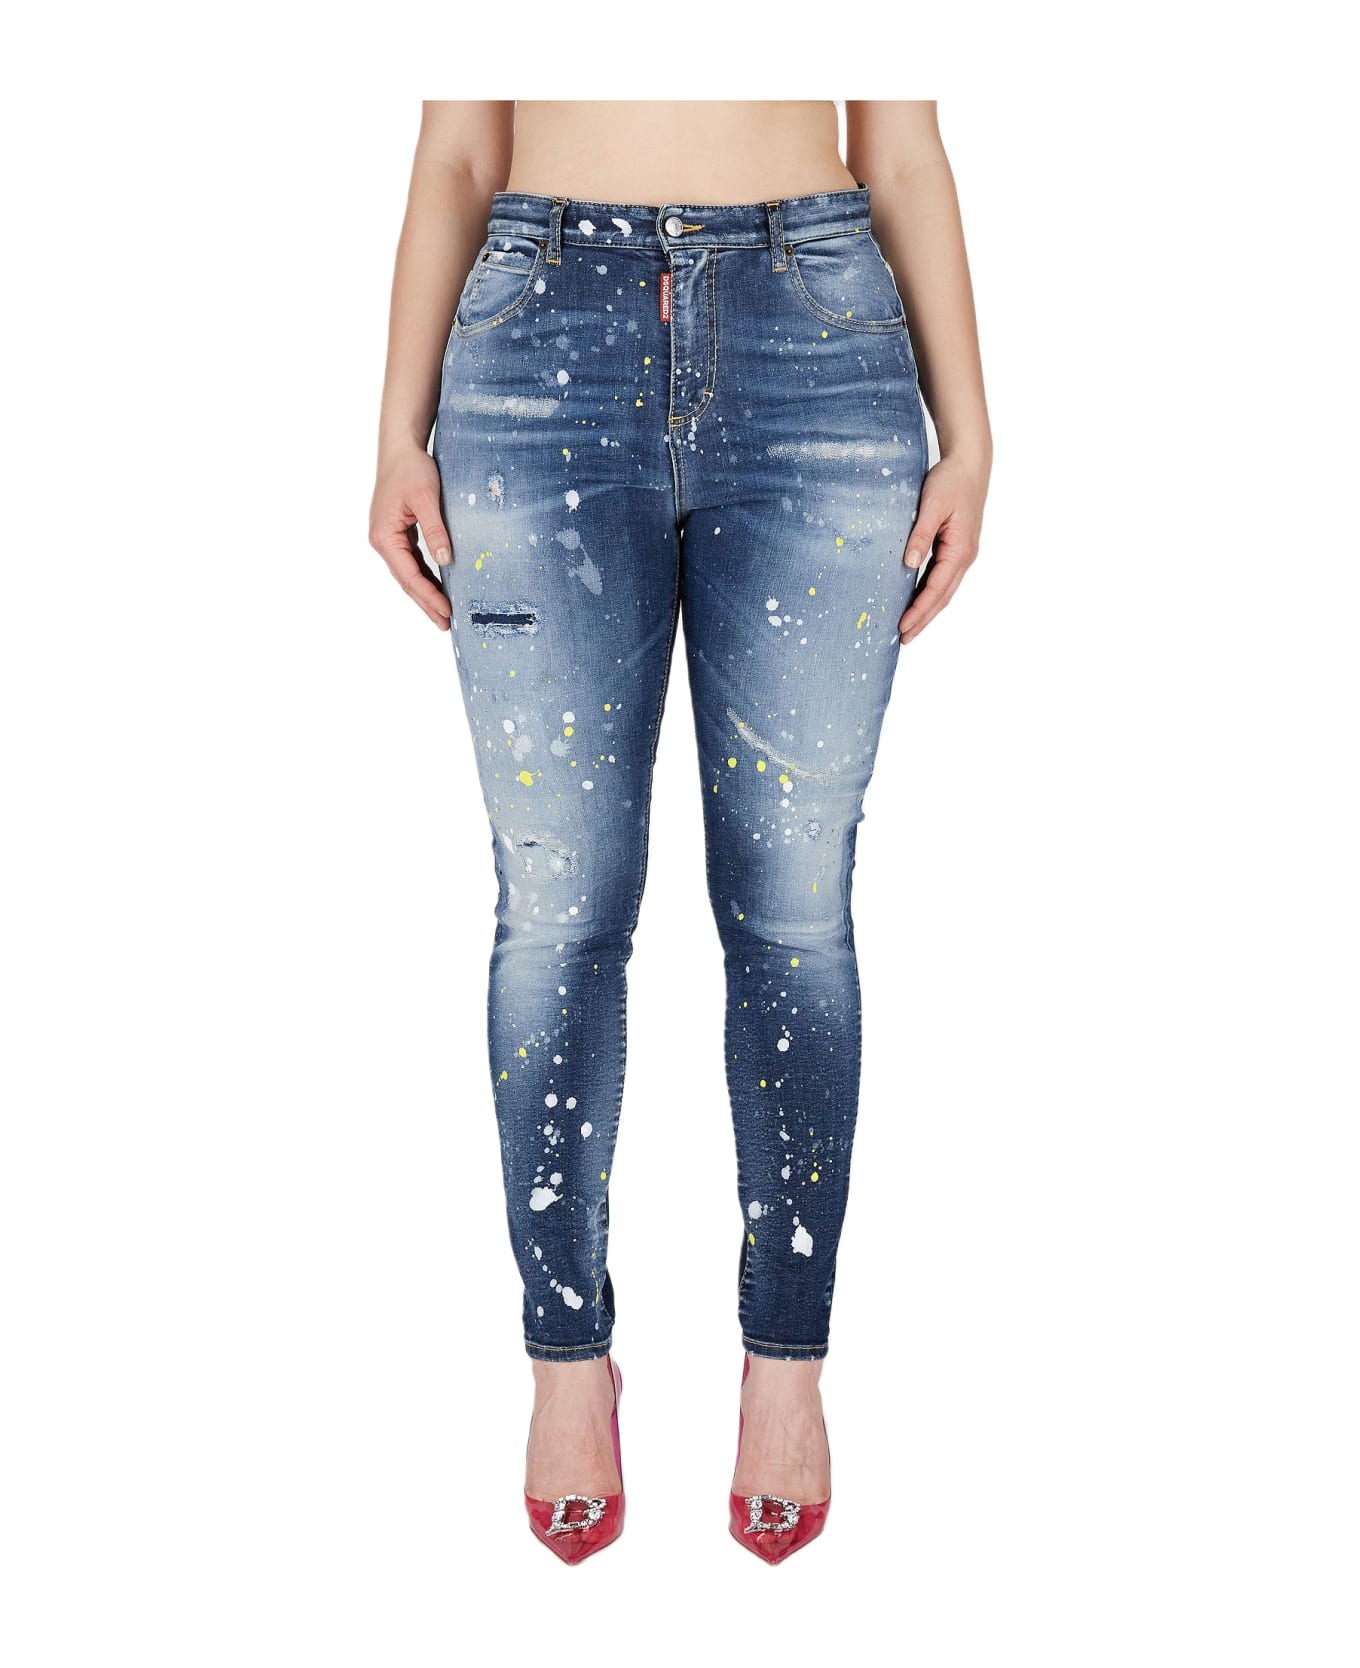 Dsquared2 'high Waist Twiggy' Jeans - Blue navy ボトムス